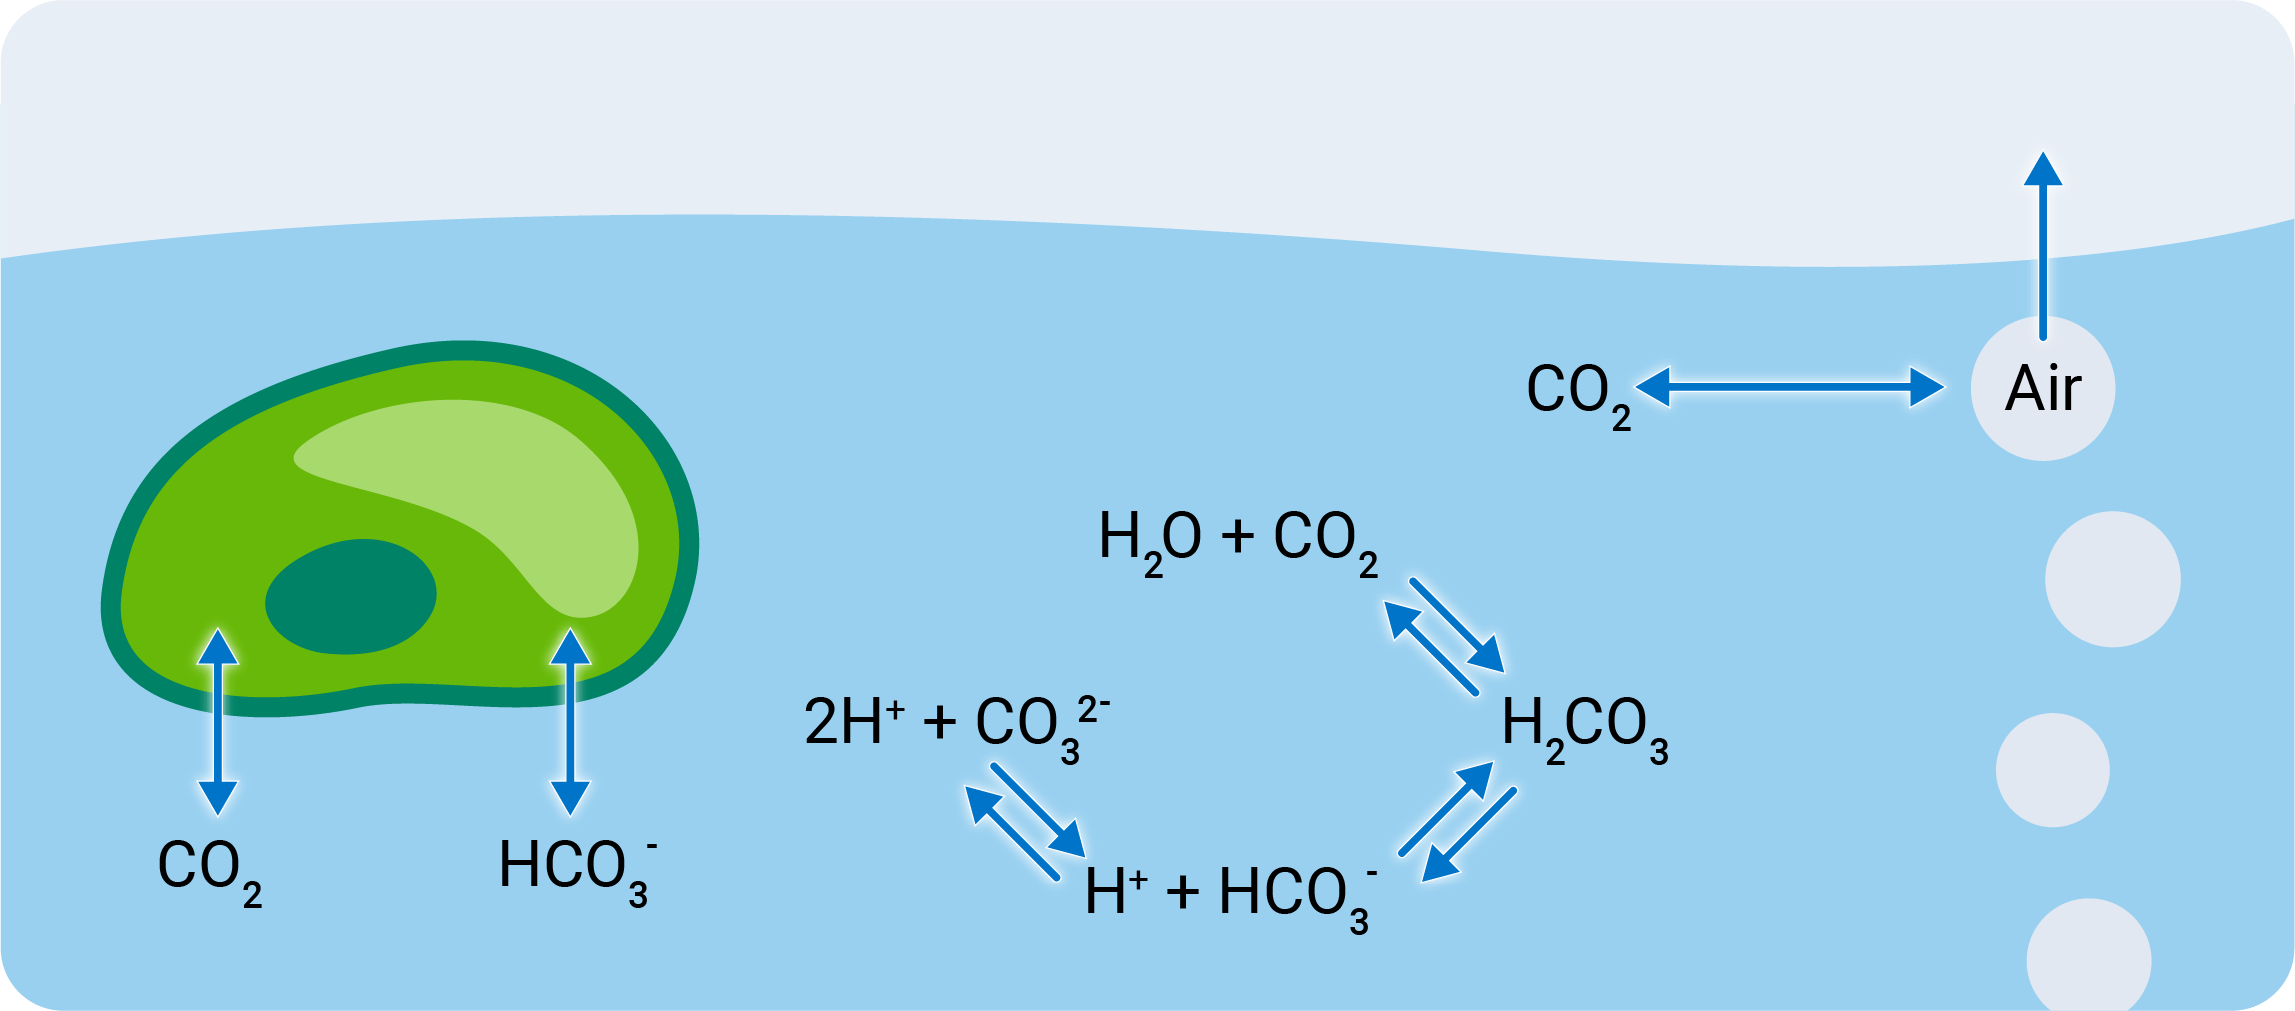 CO2 transfer from air to water